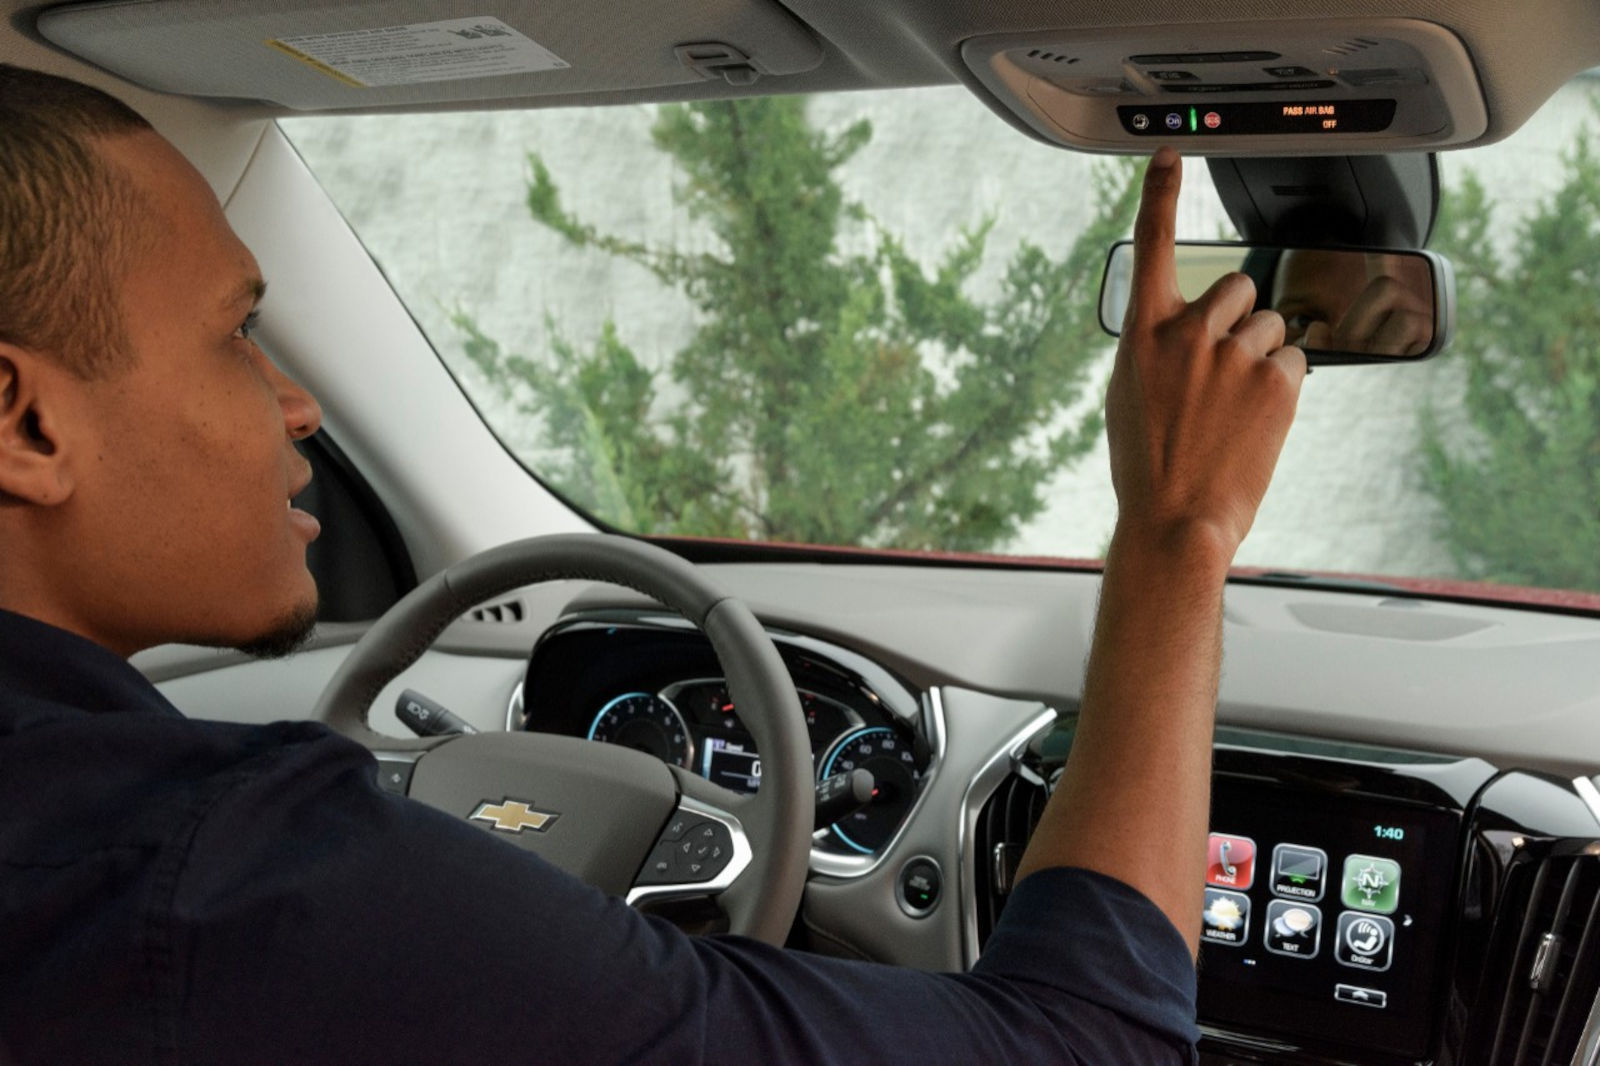 5 Things the GM OnStar System Can Help You With